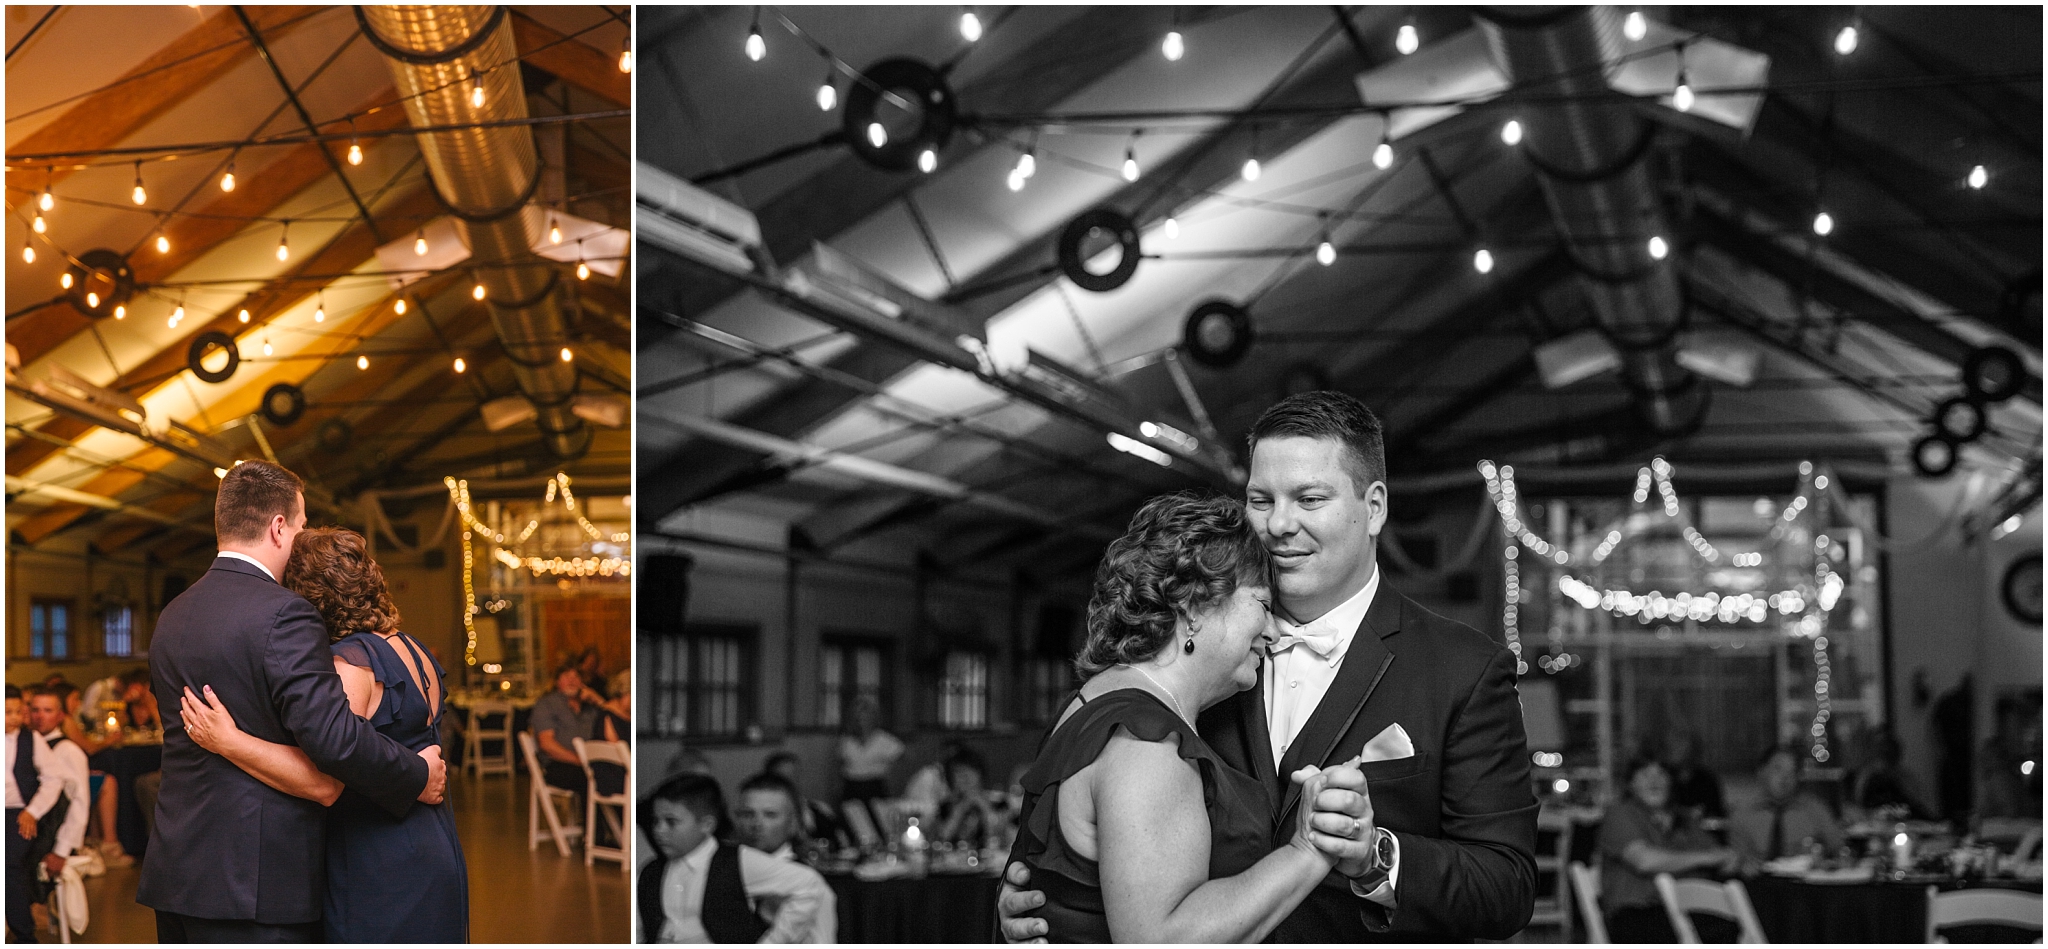 Groom dances with his mother at Pickering Barn wedding reception in Issaquah Washington